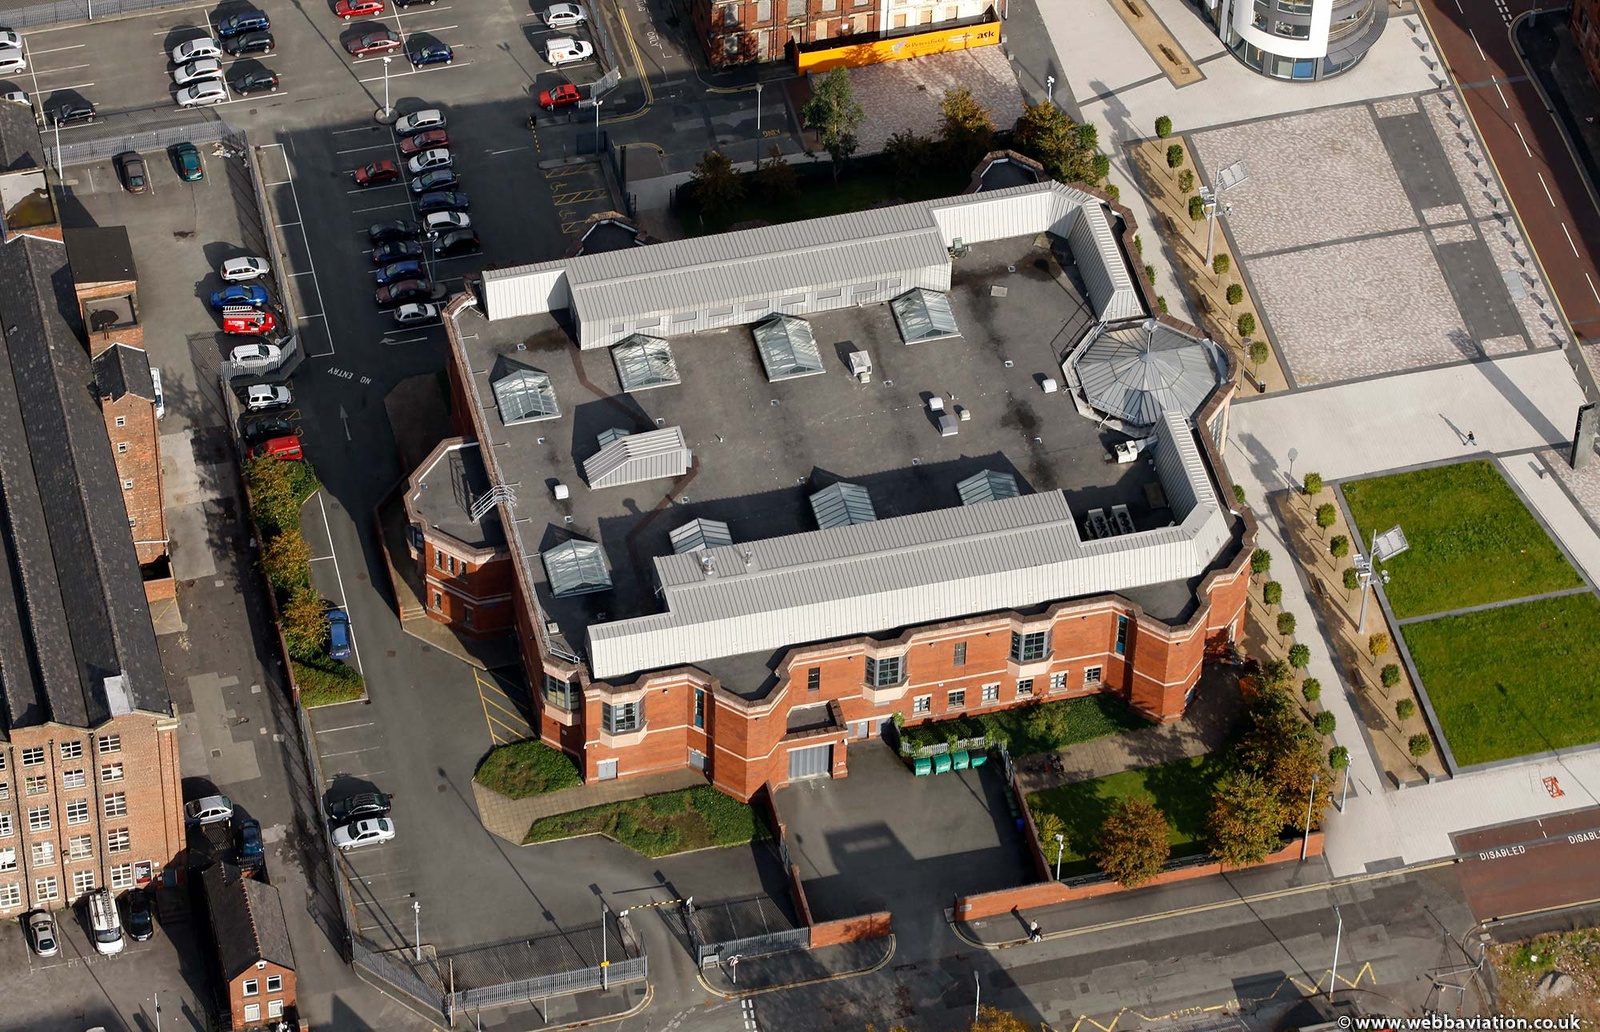 Tameside Magistrates' Court  Ashton-under-Lyne from the air